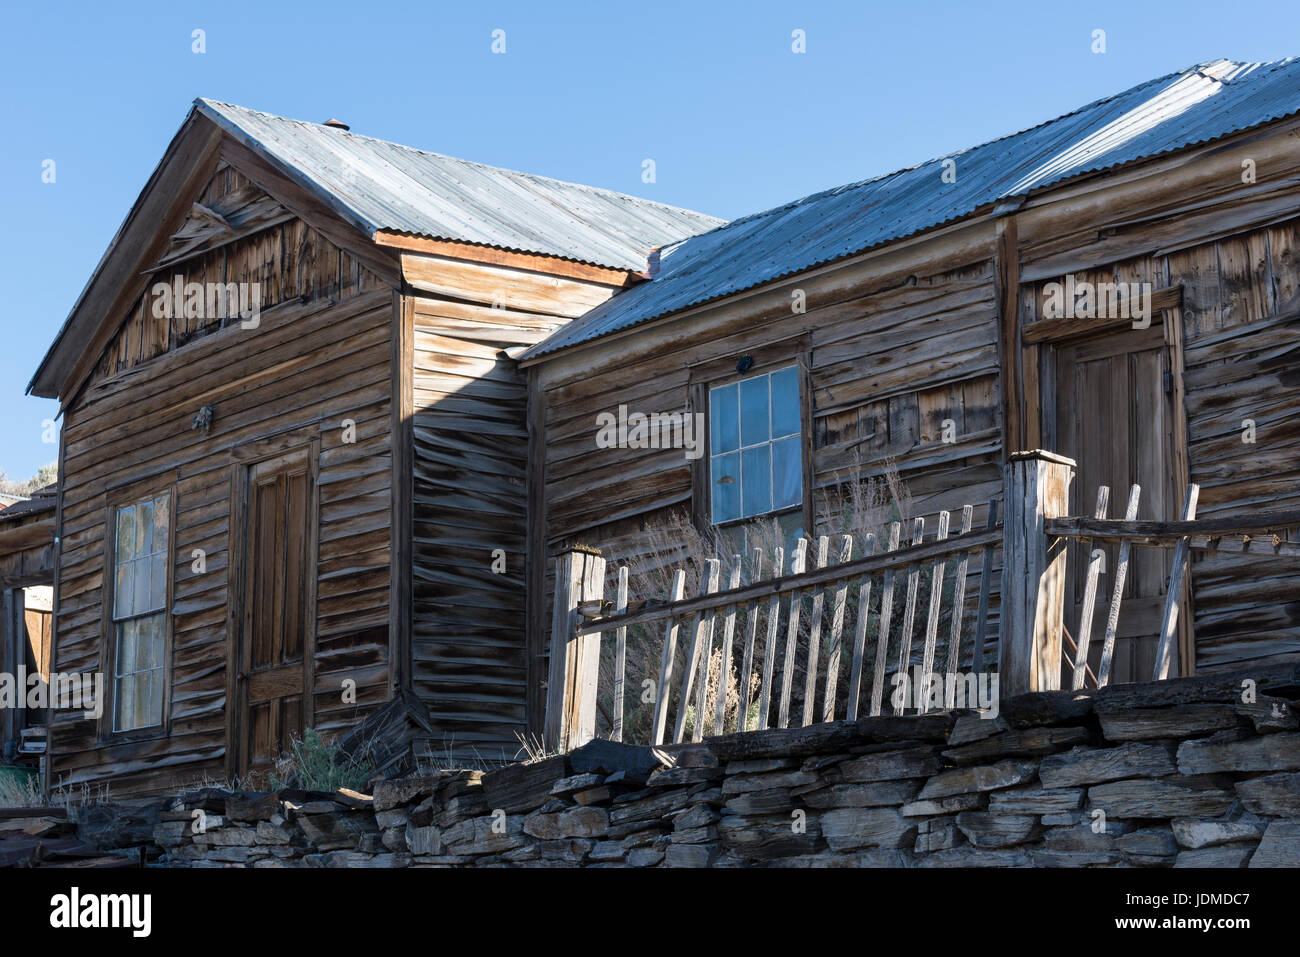 Old house in the historic mining town of Belmont, Nevada. Stock Photo